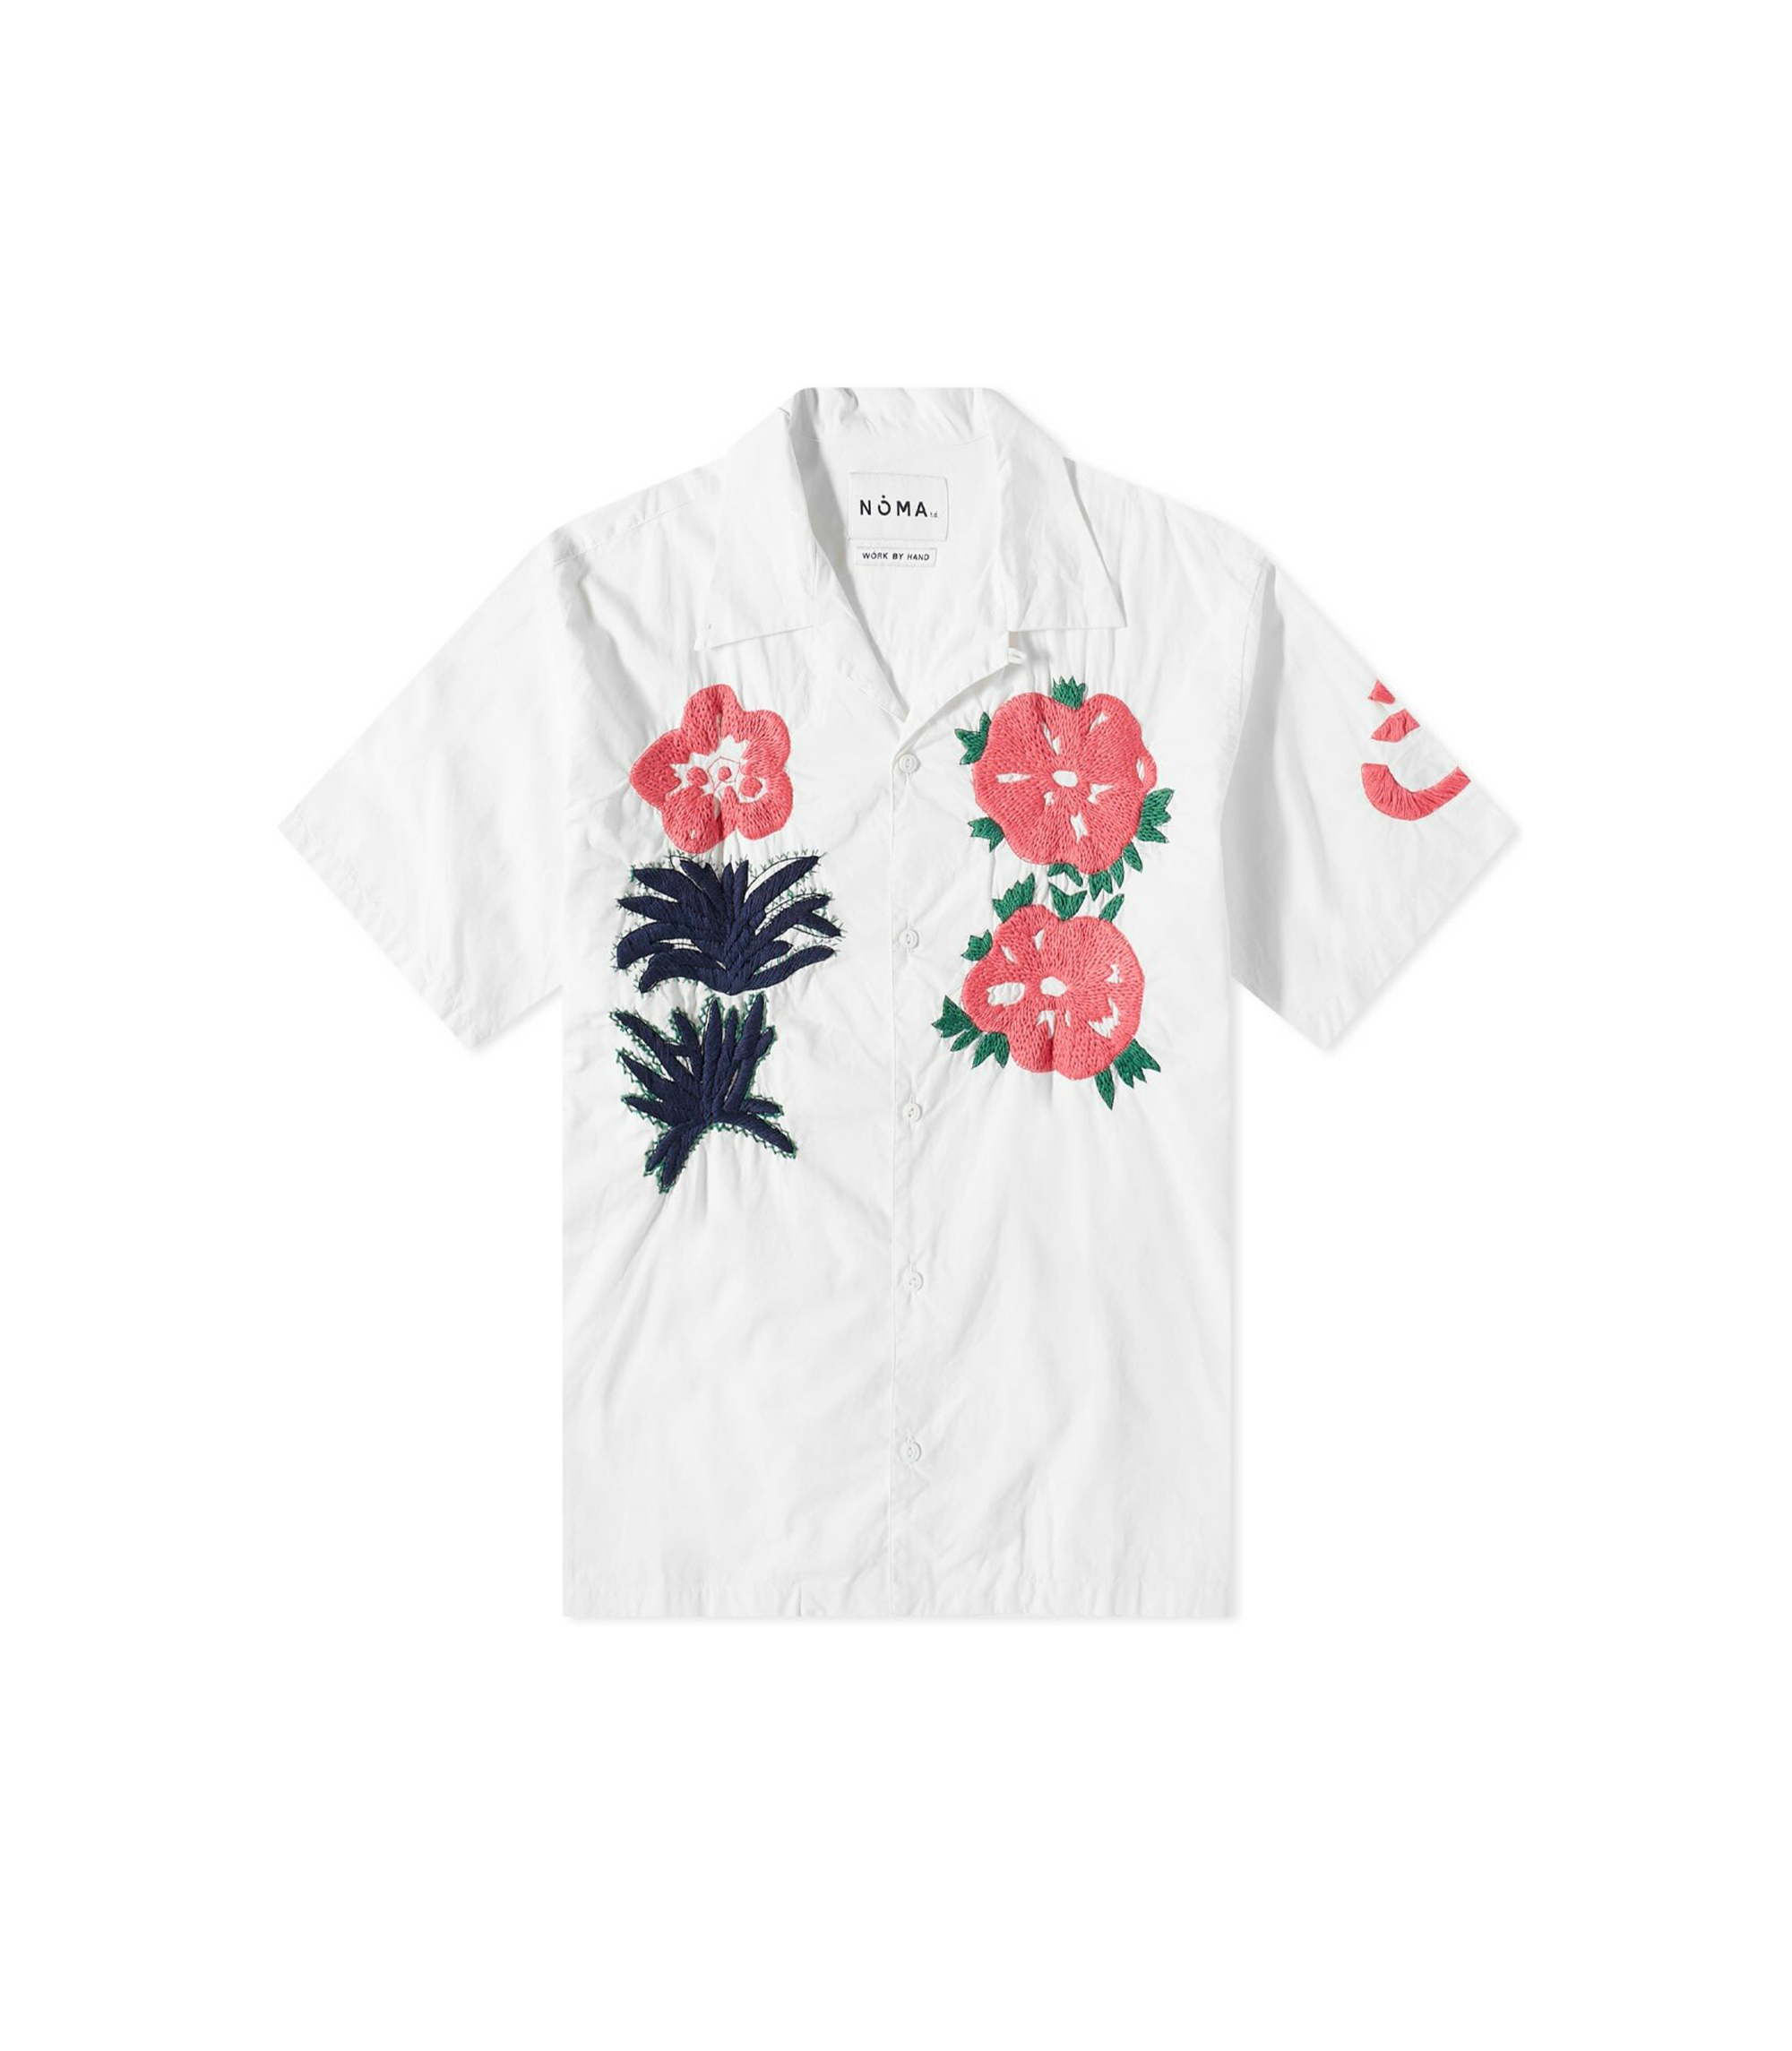 Flower & Cactus Hand Embroidery Shirt - White